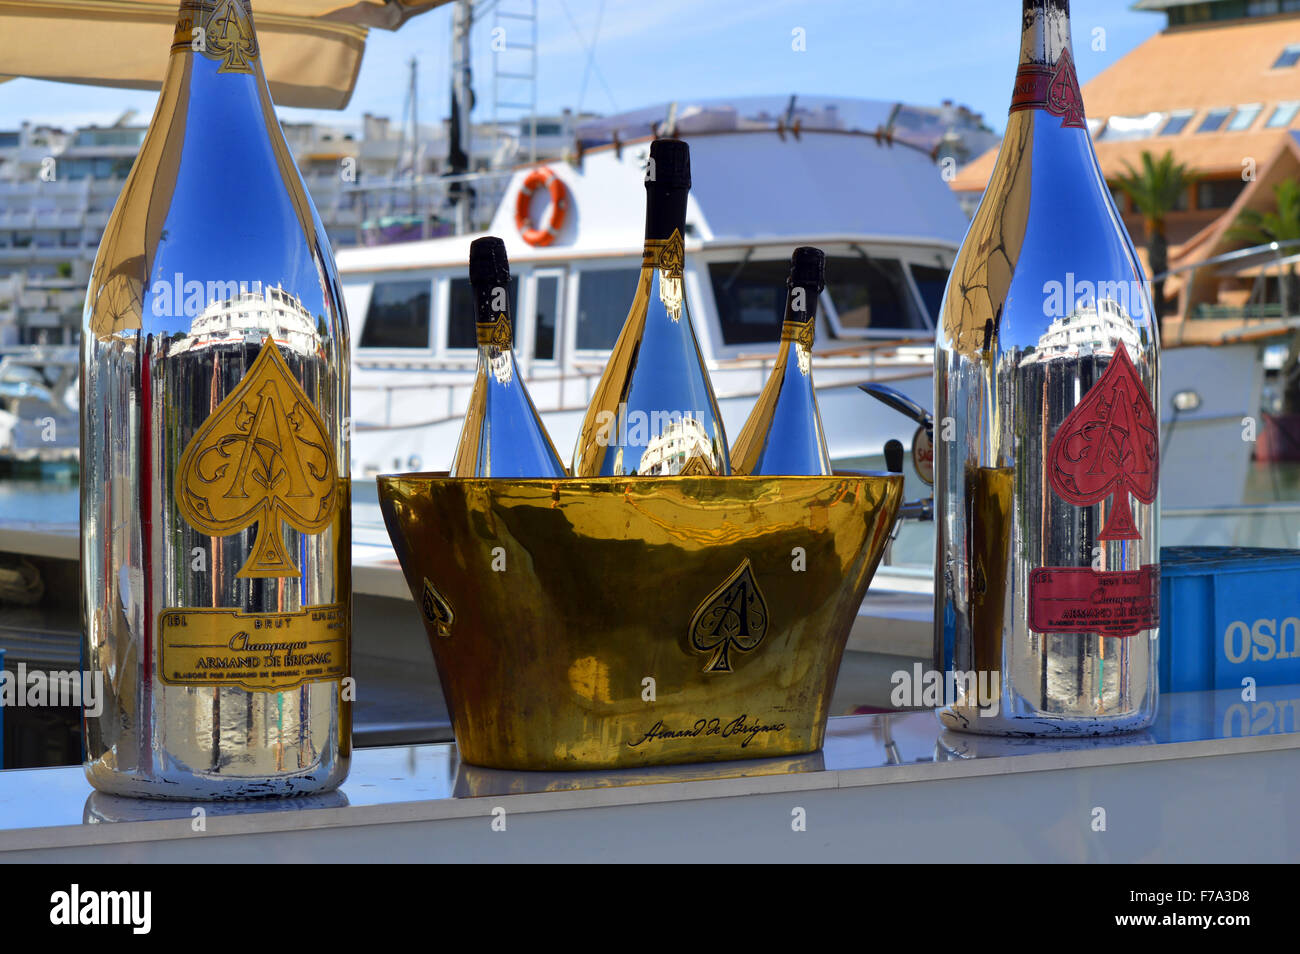 Armand De Brignac Ace Of Spades Brut Champagne bottles and ice bucket outside a Stock Photo